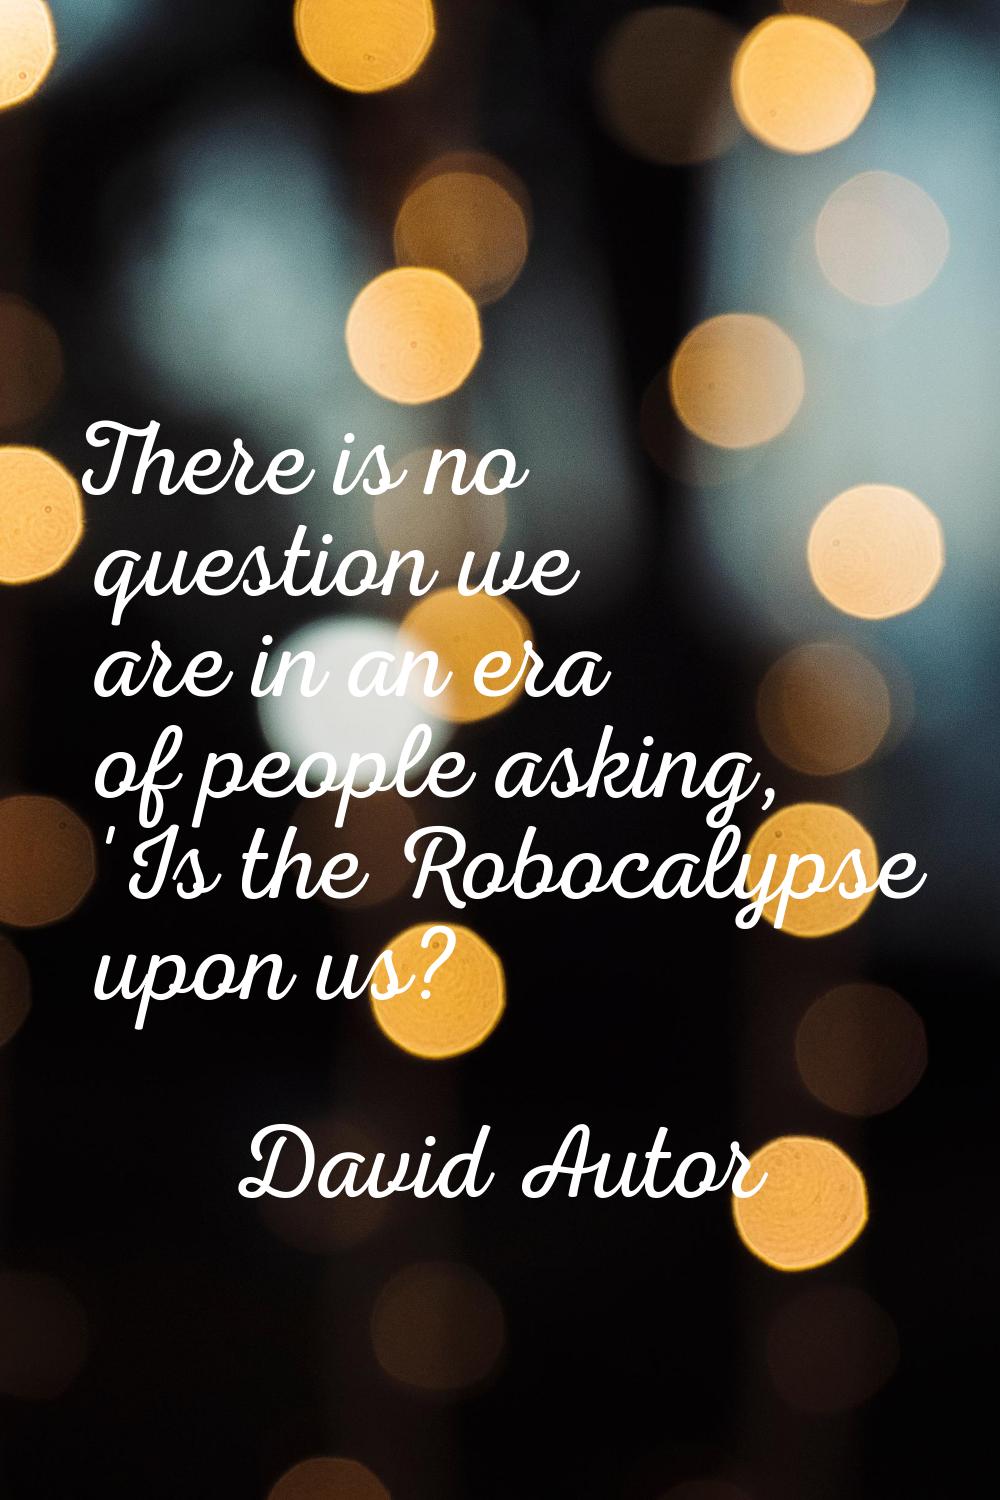 There is no question we are in an era of people asking, 'Is the Robocalypse upon us?